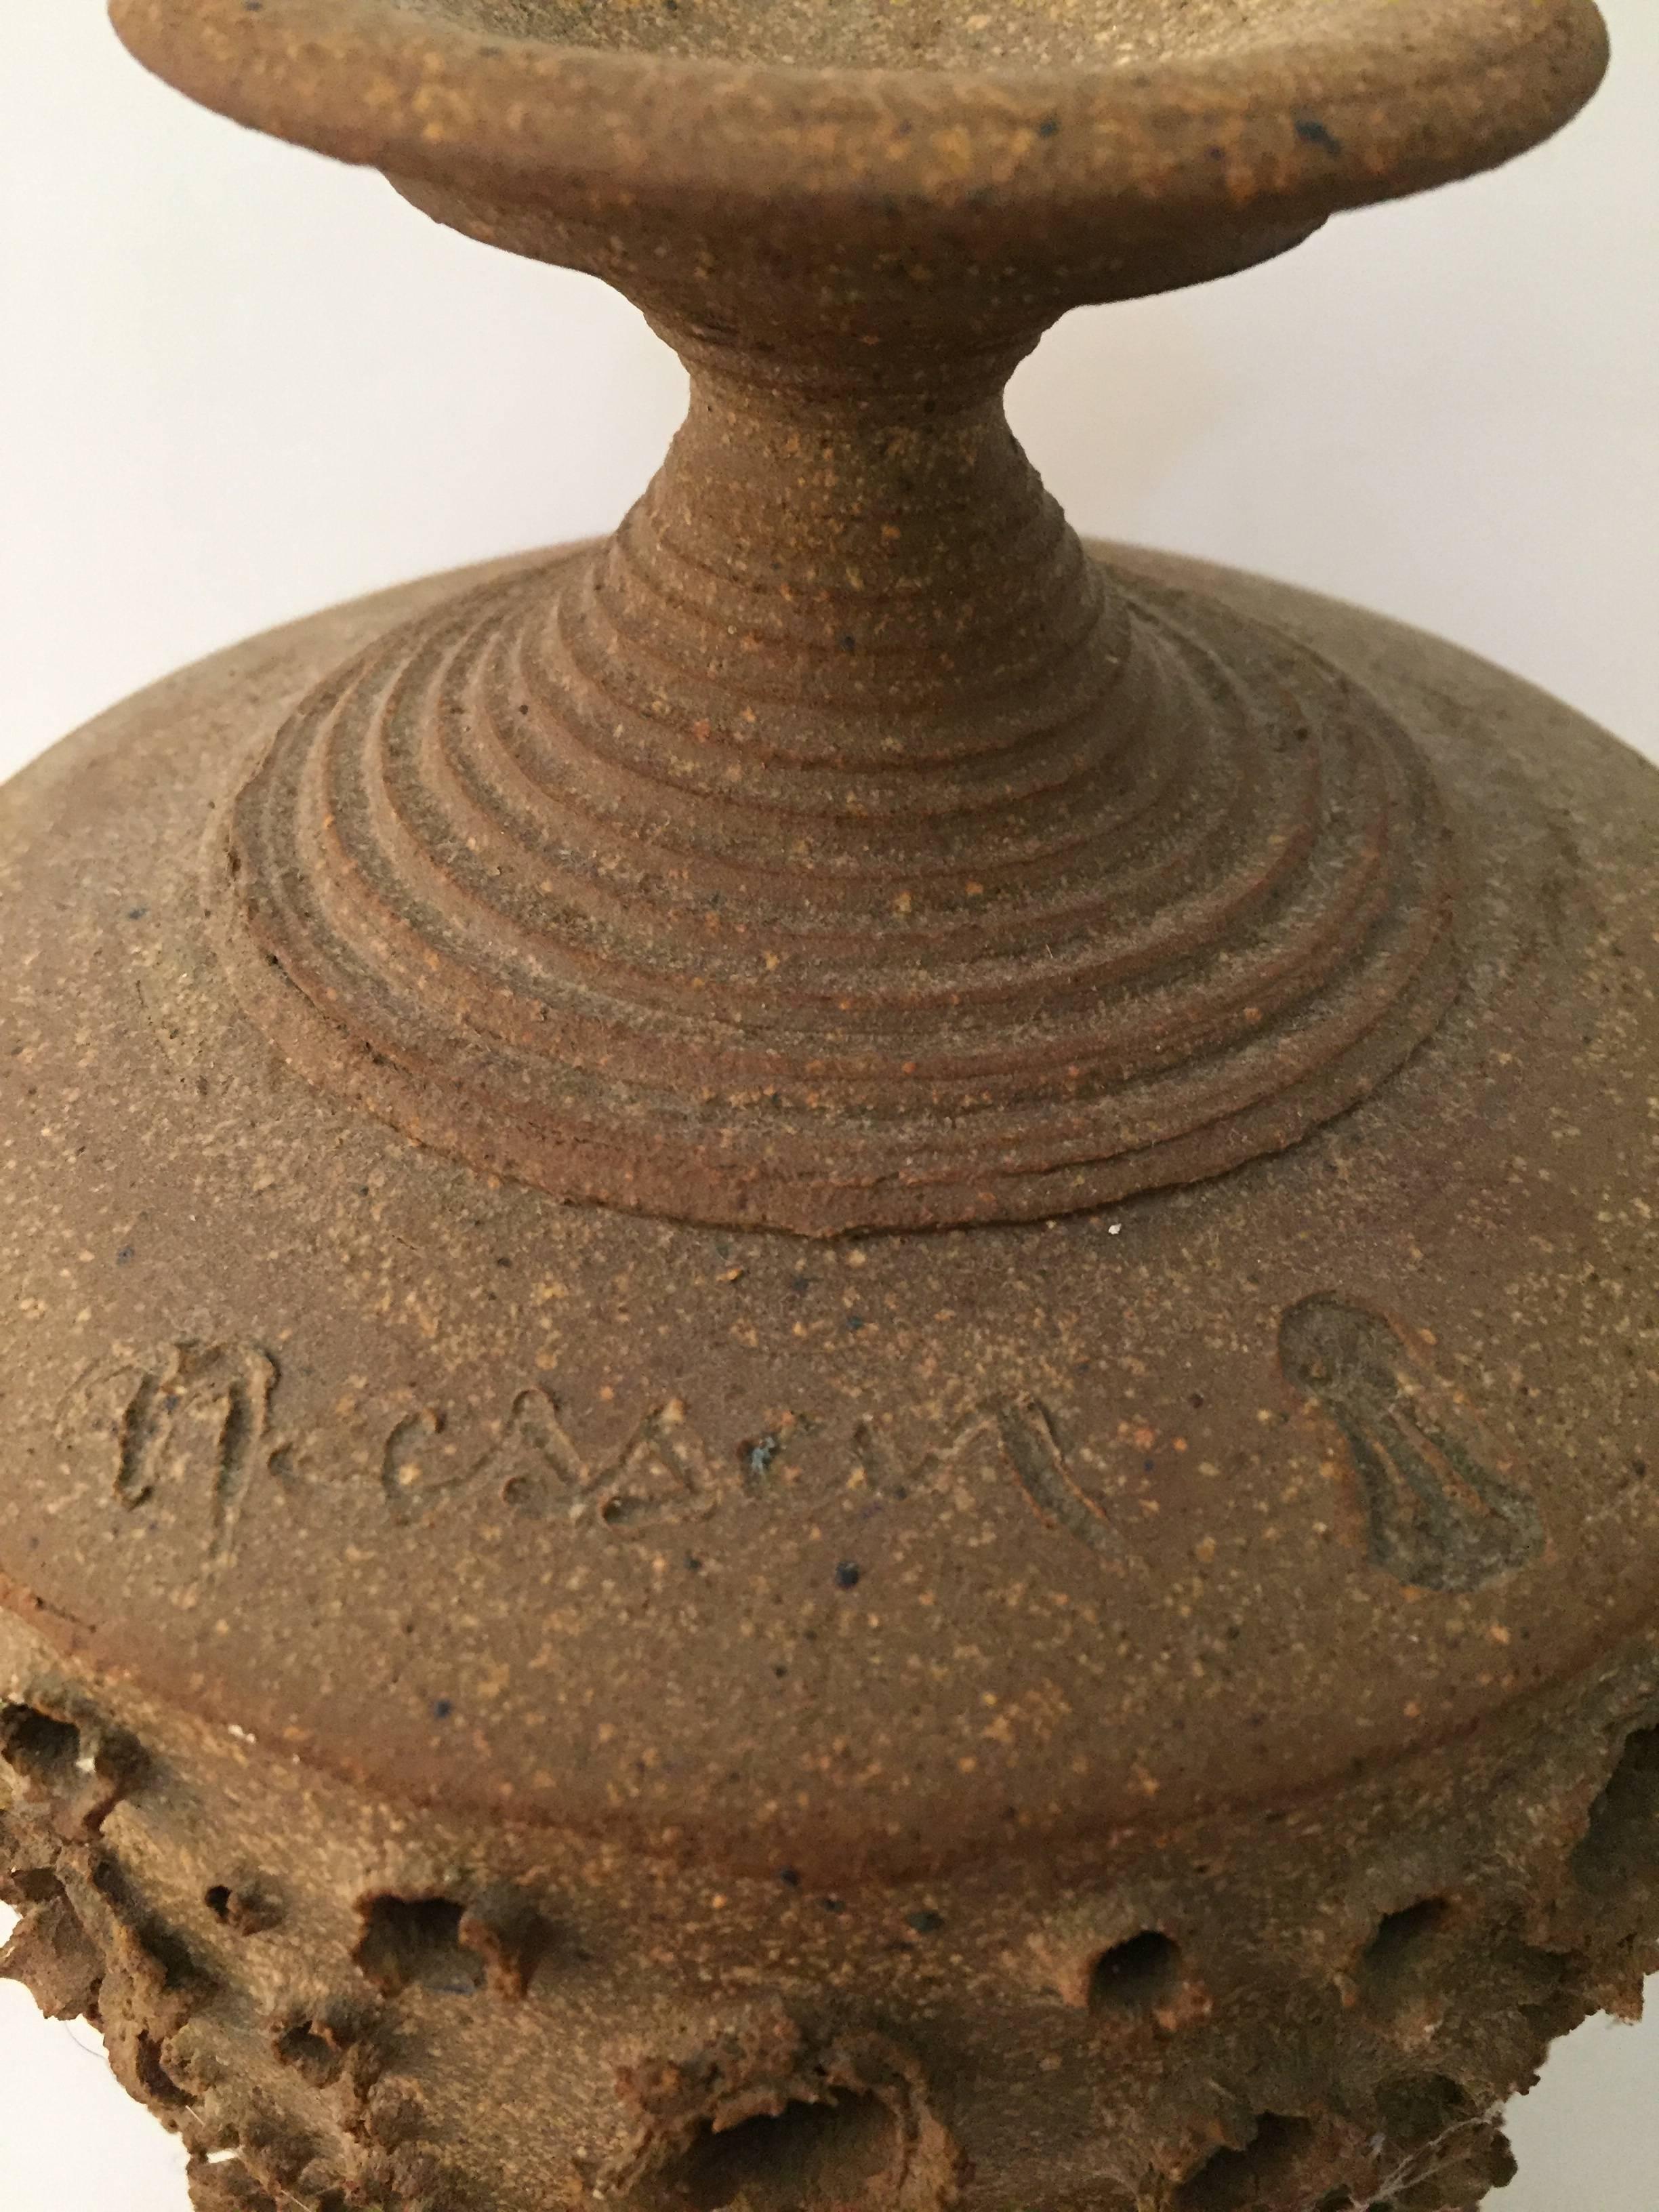 Signed John Masson Studio Pottery pendant light shade. Unglazed stoneware body with pierced and blown out holes to let light escape. Circa 1969. Very good, original condition. A light source need to hung on the inside to make this into a working